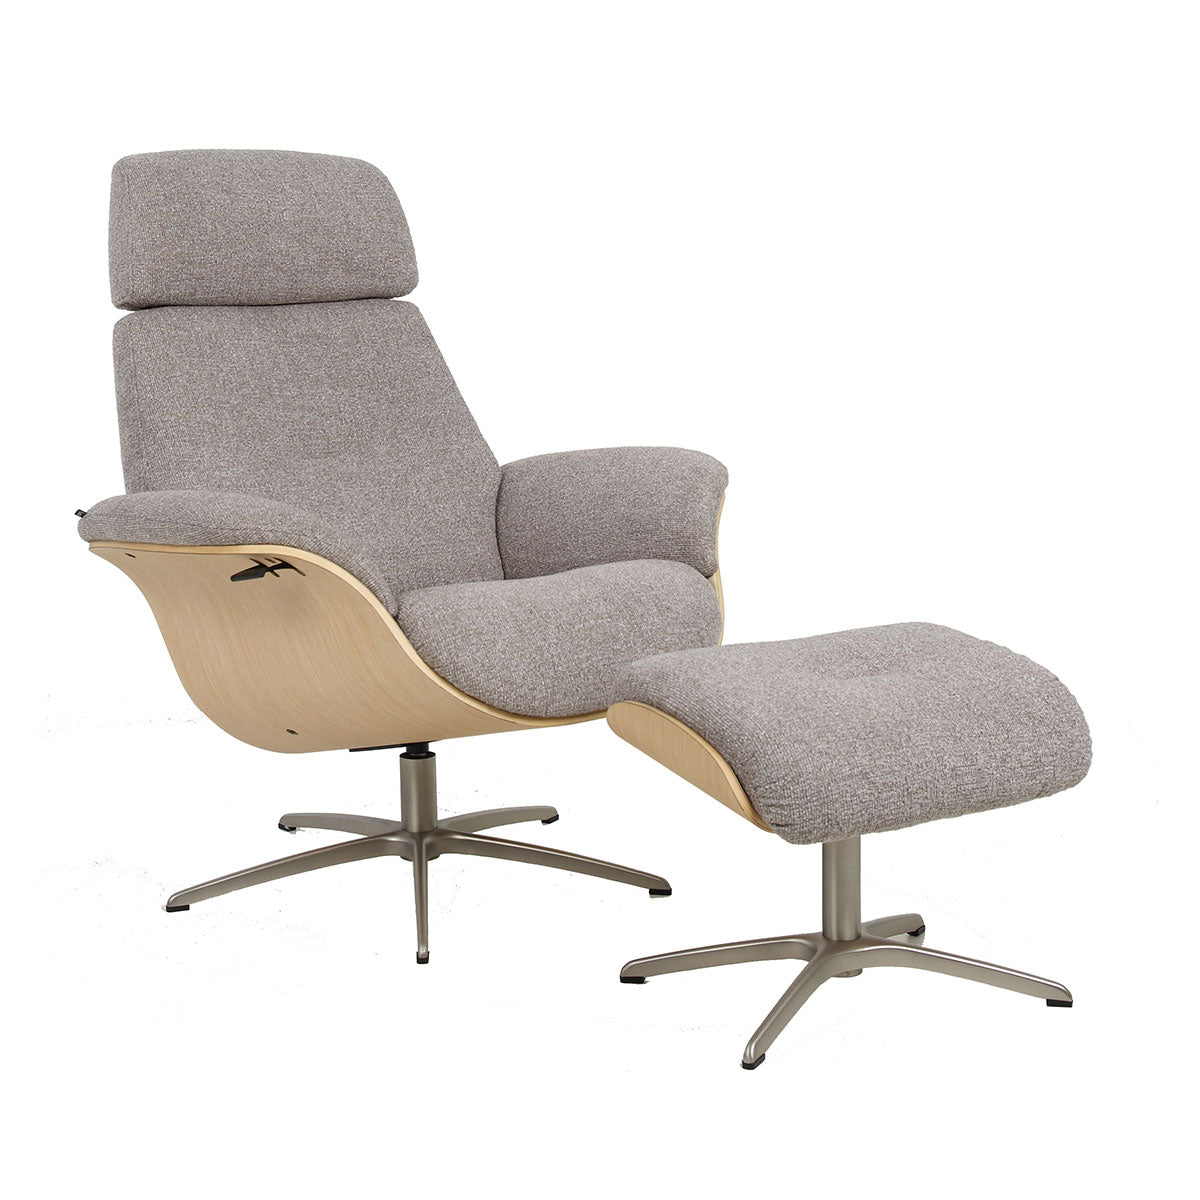 Falcon Chair and Footstool Martini Olive